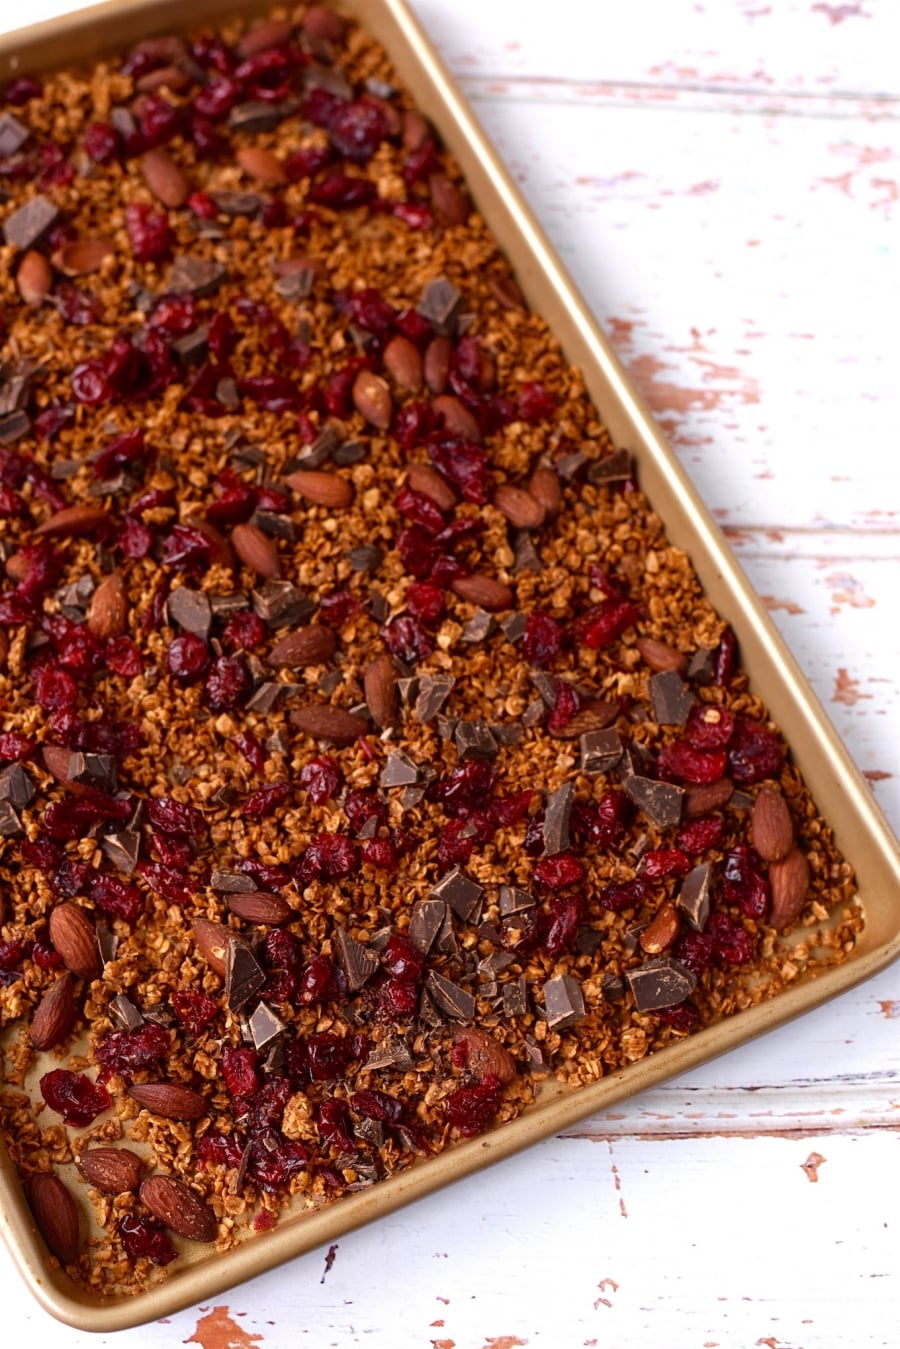 A large baking tray full of cooked granola.